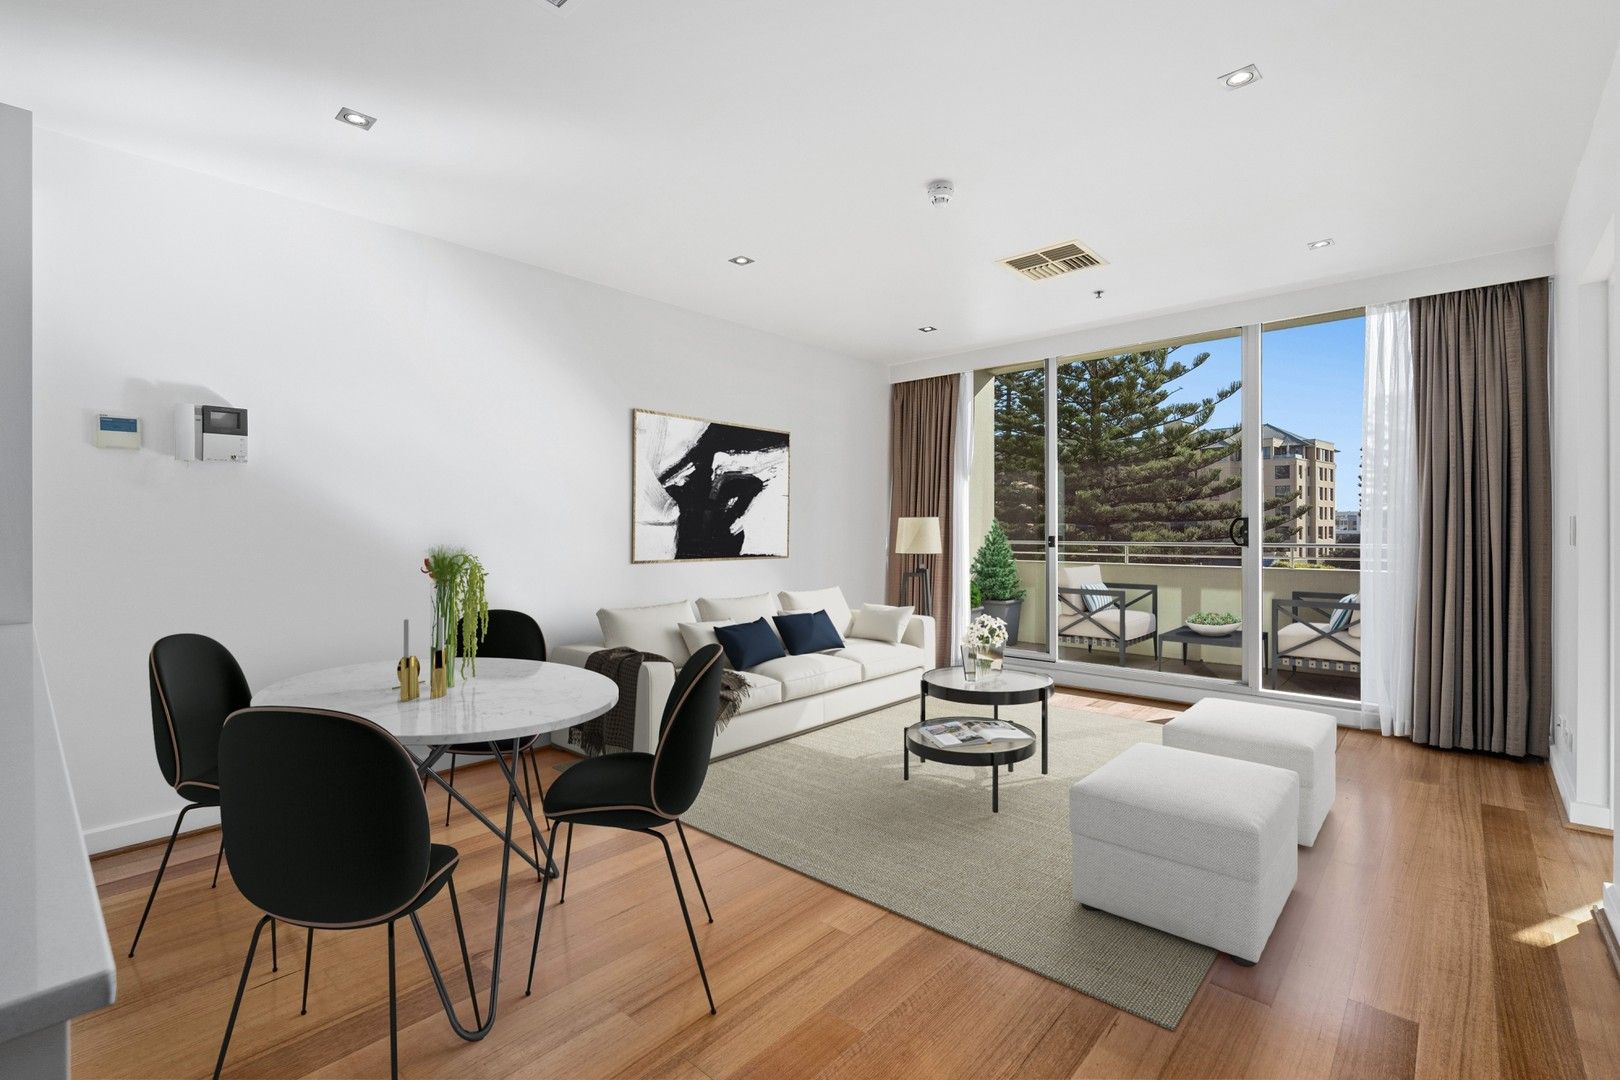 2 bedrooms Apartment / Unit / Flat in 327/29 Colley Terrace GLENELG SA, 5045